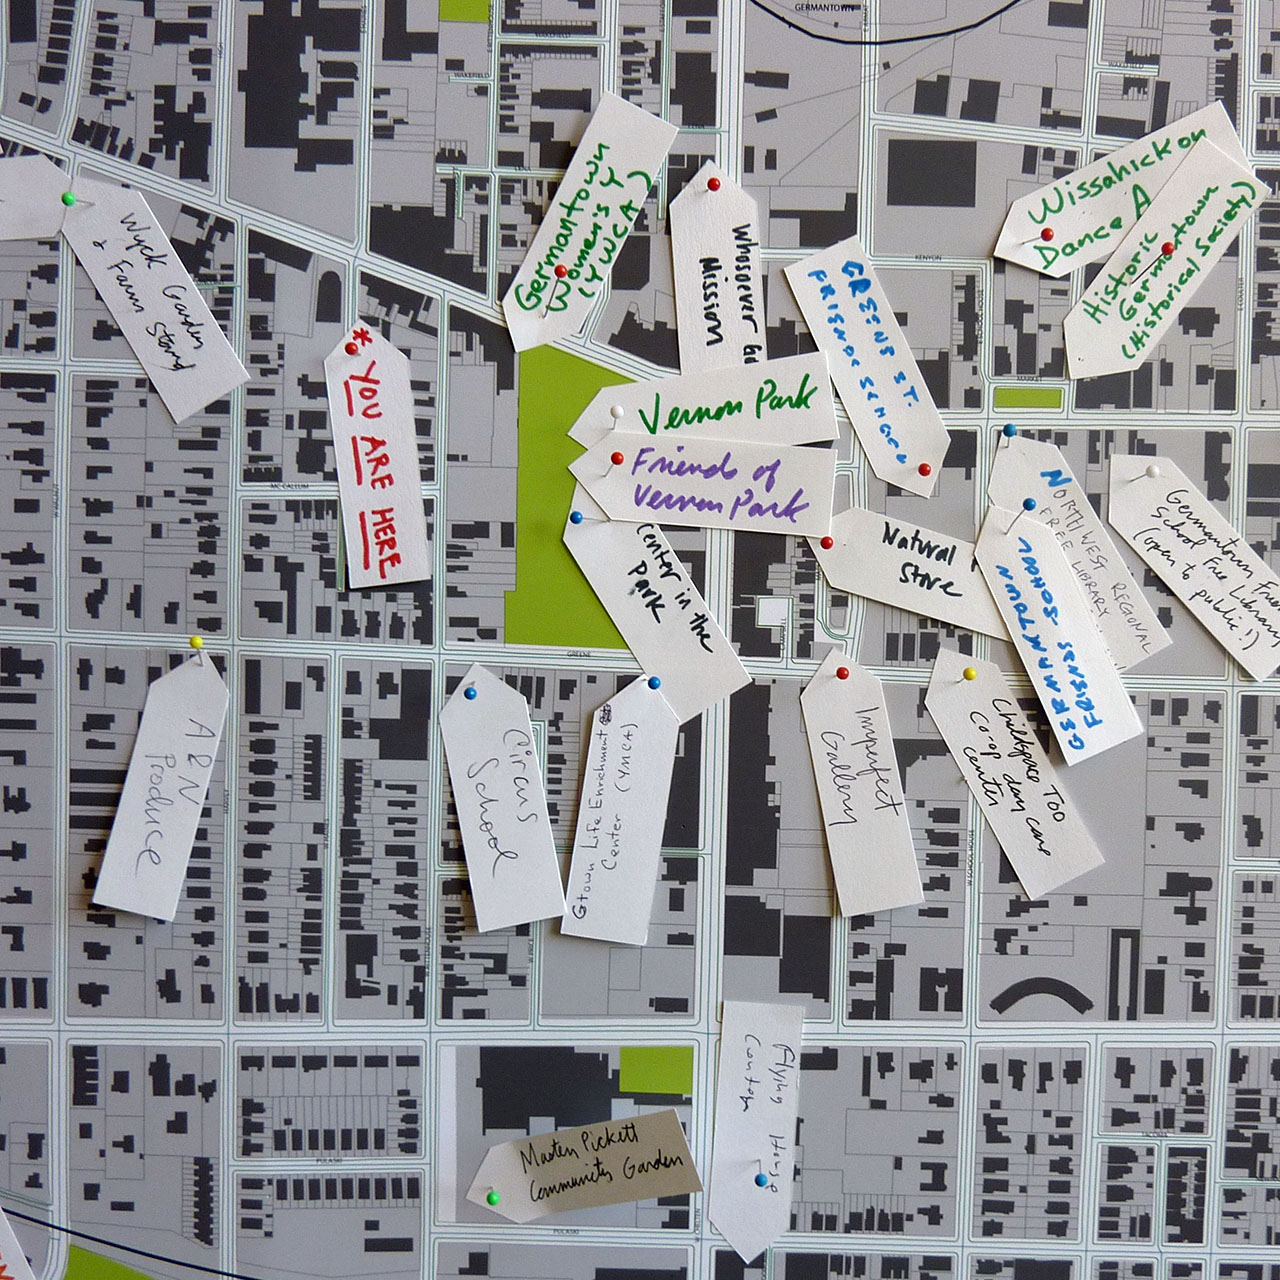 Map of Germantown, Philadelphia with pins